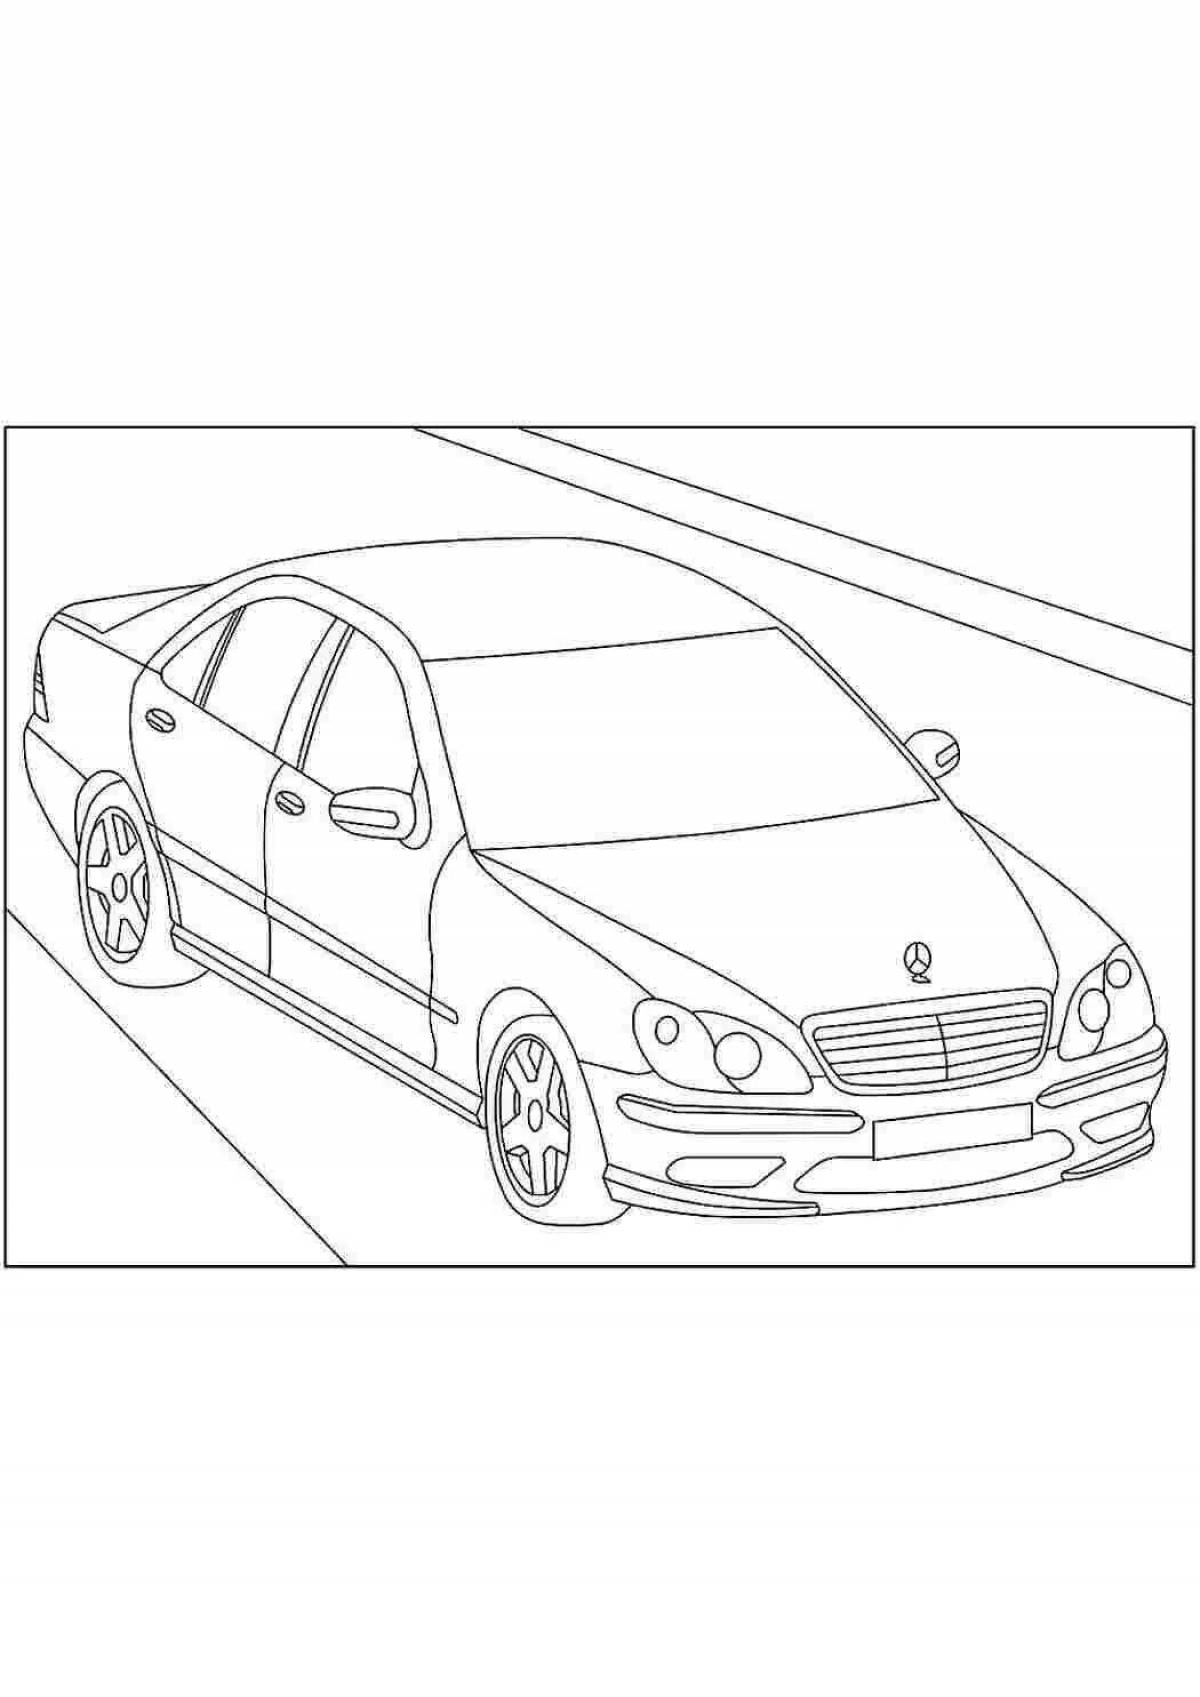 Luxury mercedes s class coloring book